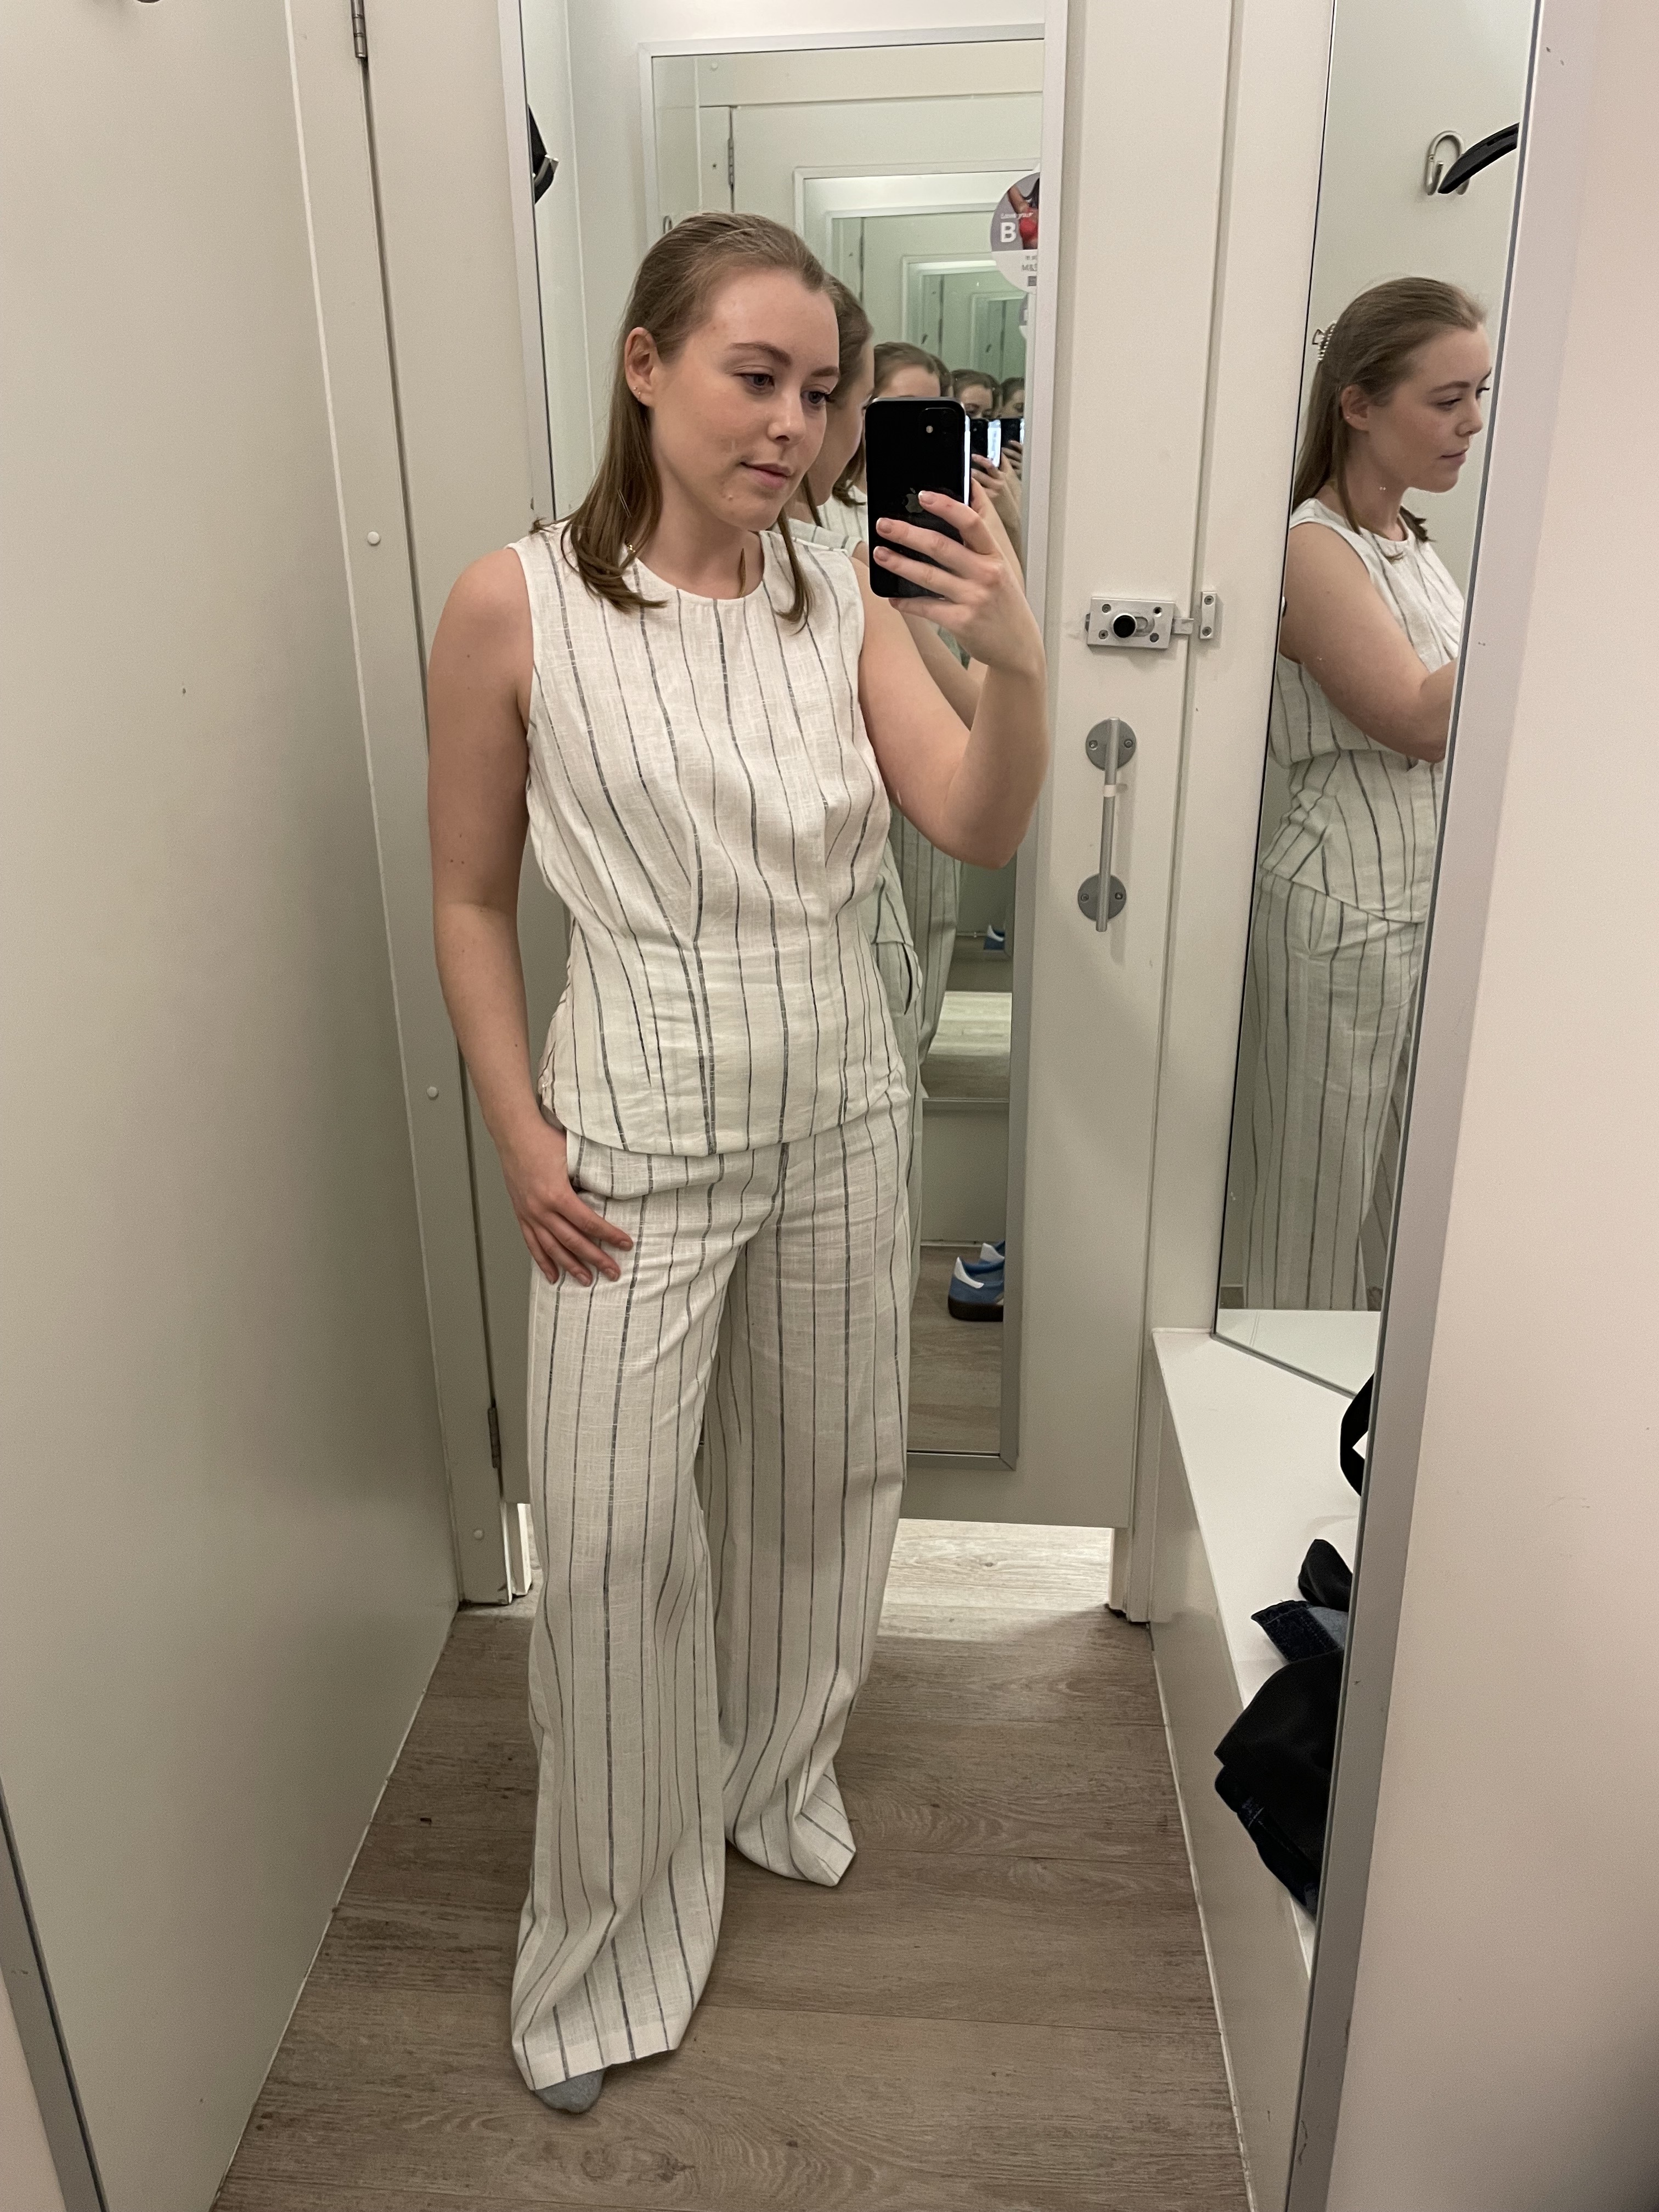 Woman in dressing rooms wears striped top and striped linen trousers